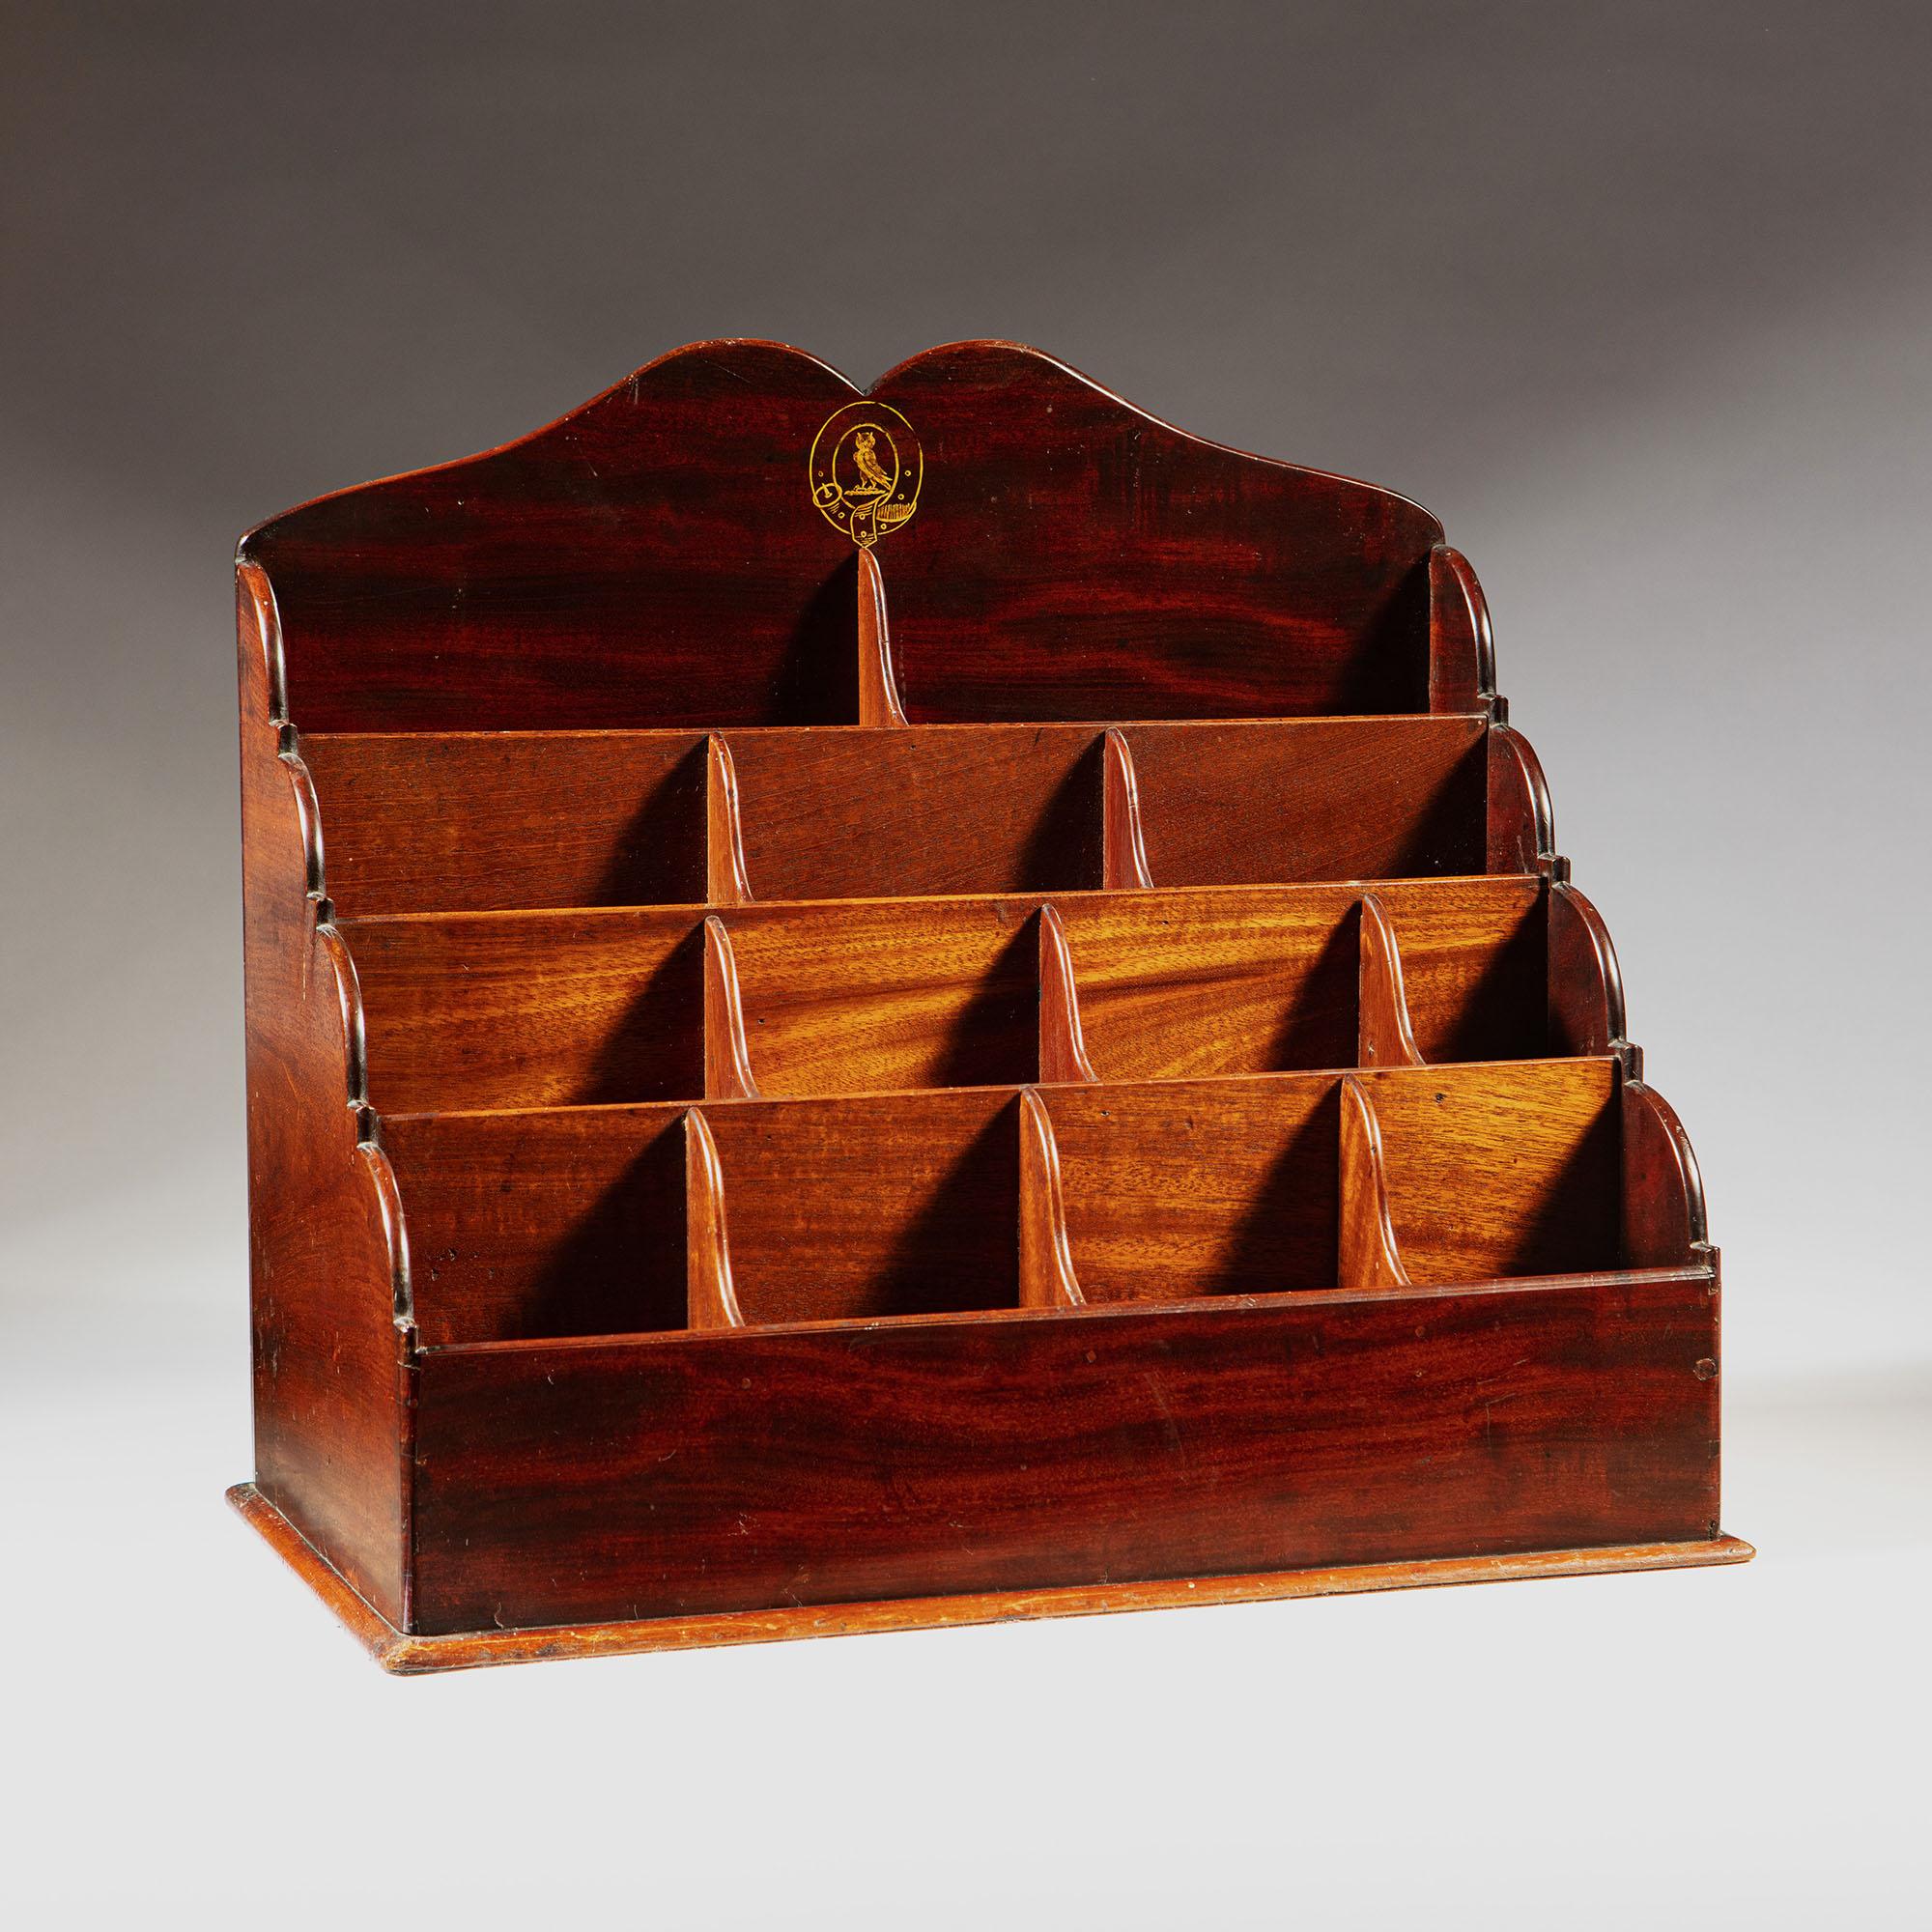 A late 19th century flame mahogany waterfall desk organizer or letter rack, with owl coat of arms to the pediment and thirteen storage compartments.